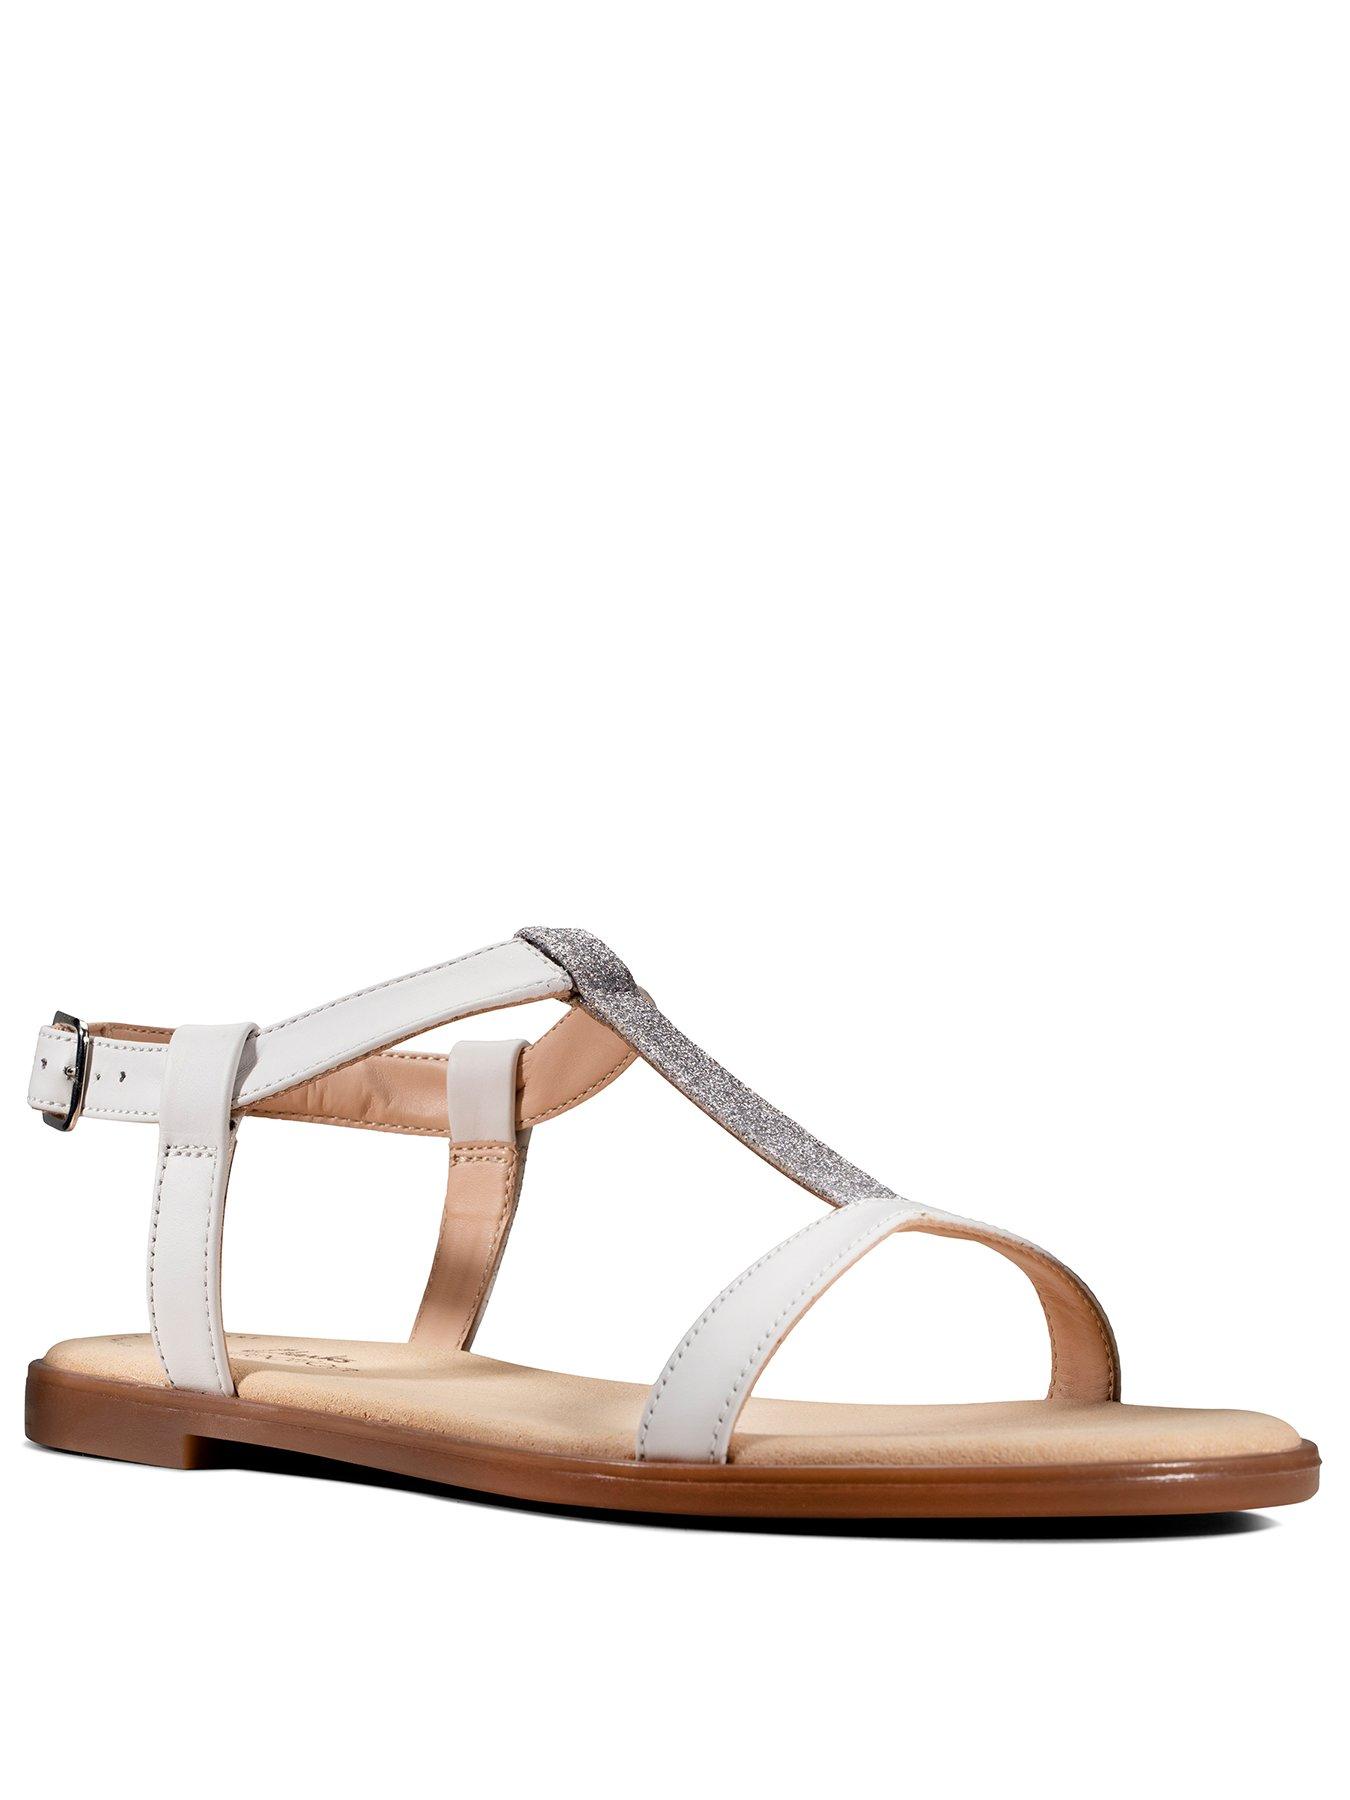 the bay clarks sandals